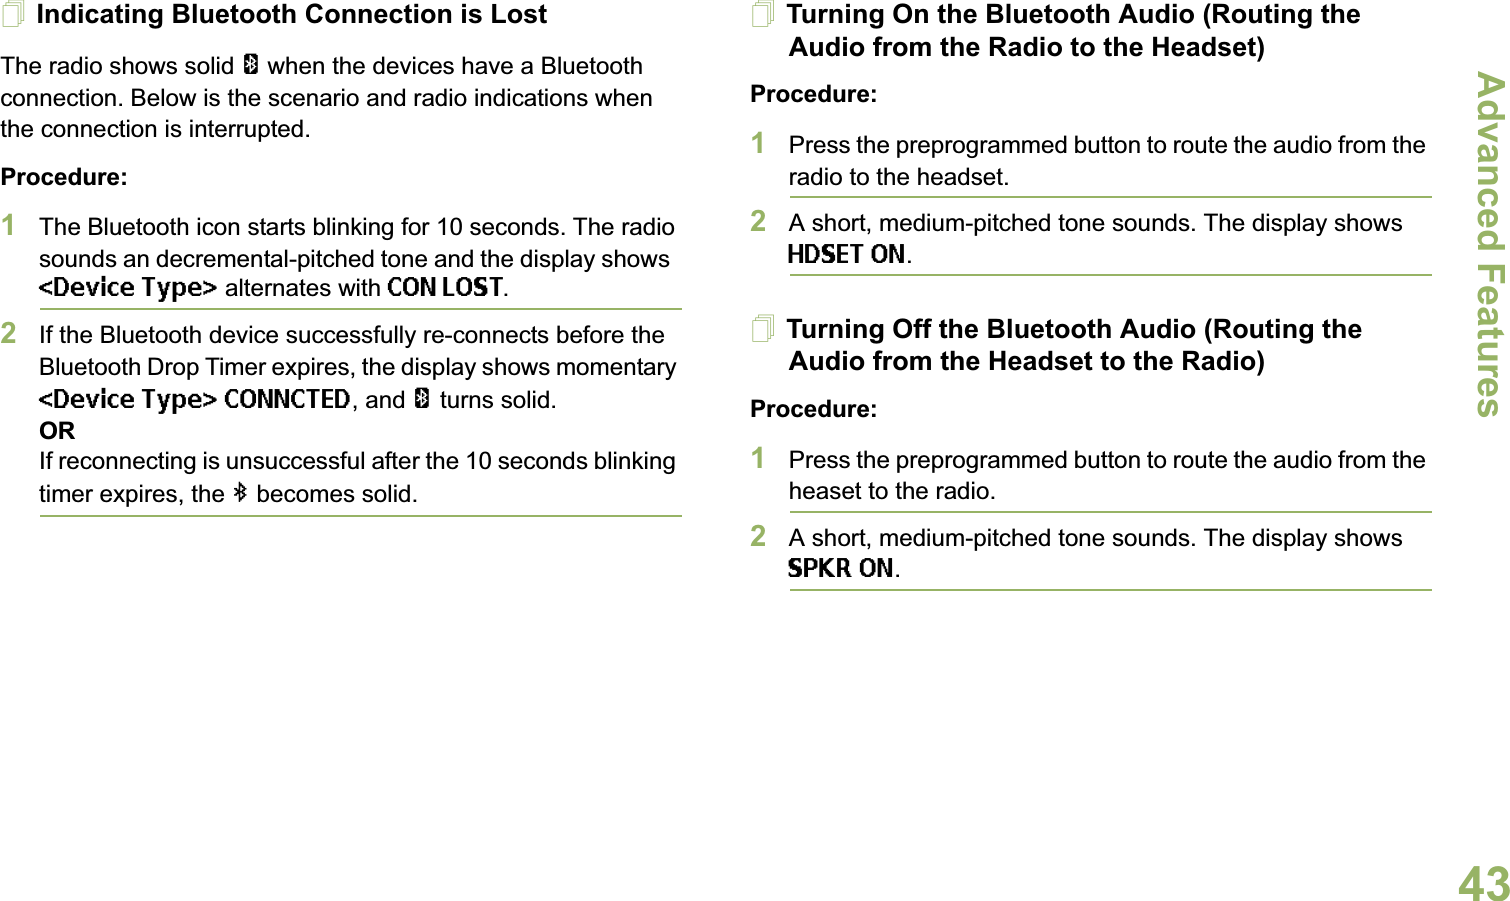 Advanced FeaturesEnglish43Indicating Bluetooth Connection is LostThe radio shows solid a when the devices have a Bluetooth connection. Below is the scenario and radio indications when the connection is interrupted. Procedure:1The Bluetooth icon starts blinking for 10 seconds. The radio sounds an decremental-pitched tone and the display shows  &lt;Device Type&gt; alternates with CON LOST.2If the Bluetooth device successfully re-connects before the Bluetooth Drop Timer expires, the display shows momentary &lt;Device Type&gt; CONNCTED, and a turns solid. ORIf reconnecting is unsuccessful after the 10 seconds blinking timer expires, the b becomes solid.Turning On the Bluetooth Audio (Routing the Audio from the Radio to the Headset)Procedure:1Press the preprogrammed button to route the audio from the radio to the headset. 2A short, medium-pitched tone sounds. The display shows HDSET ON.Turning Off the Bluetooth Audio (Routing the Audio from the Headset to the Radio)Procedure:1Press the preprogrammed button to route the audio from the heaset to the radio.2A short, medium-pitched tone sounds. The display shows SPKR ON.